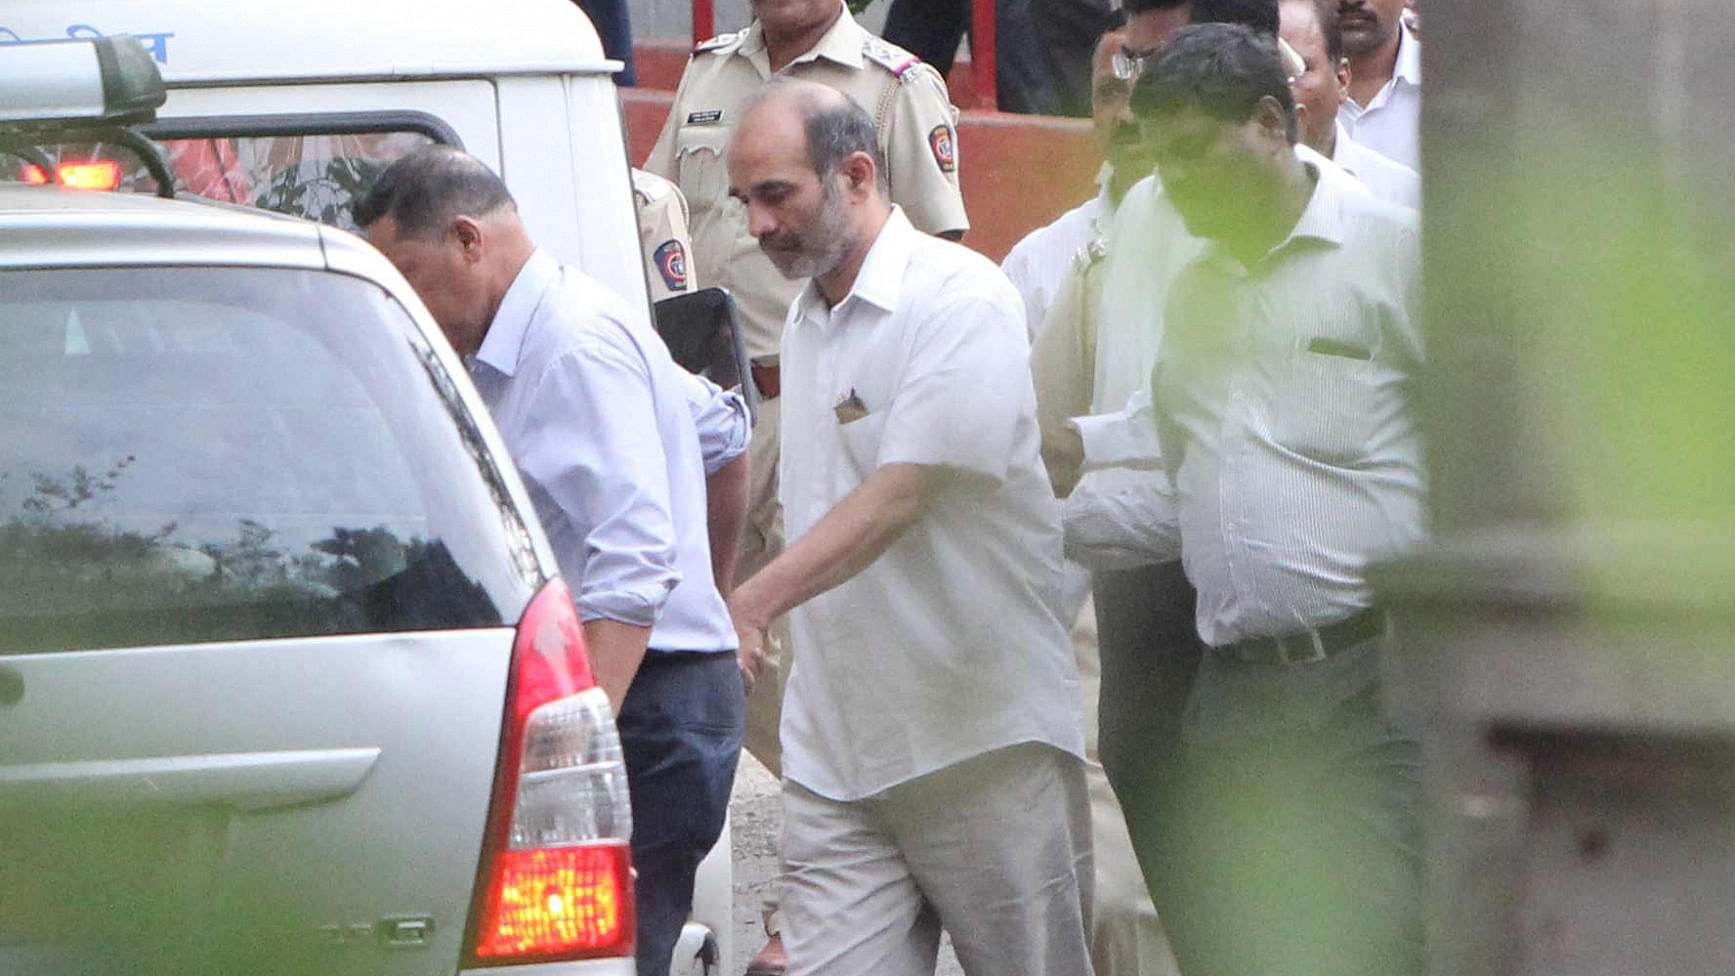 Virendra Tawde being taken away after he was produced in front of a Sessions Court. (Photo: IANS)